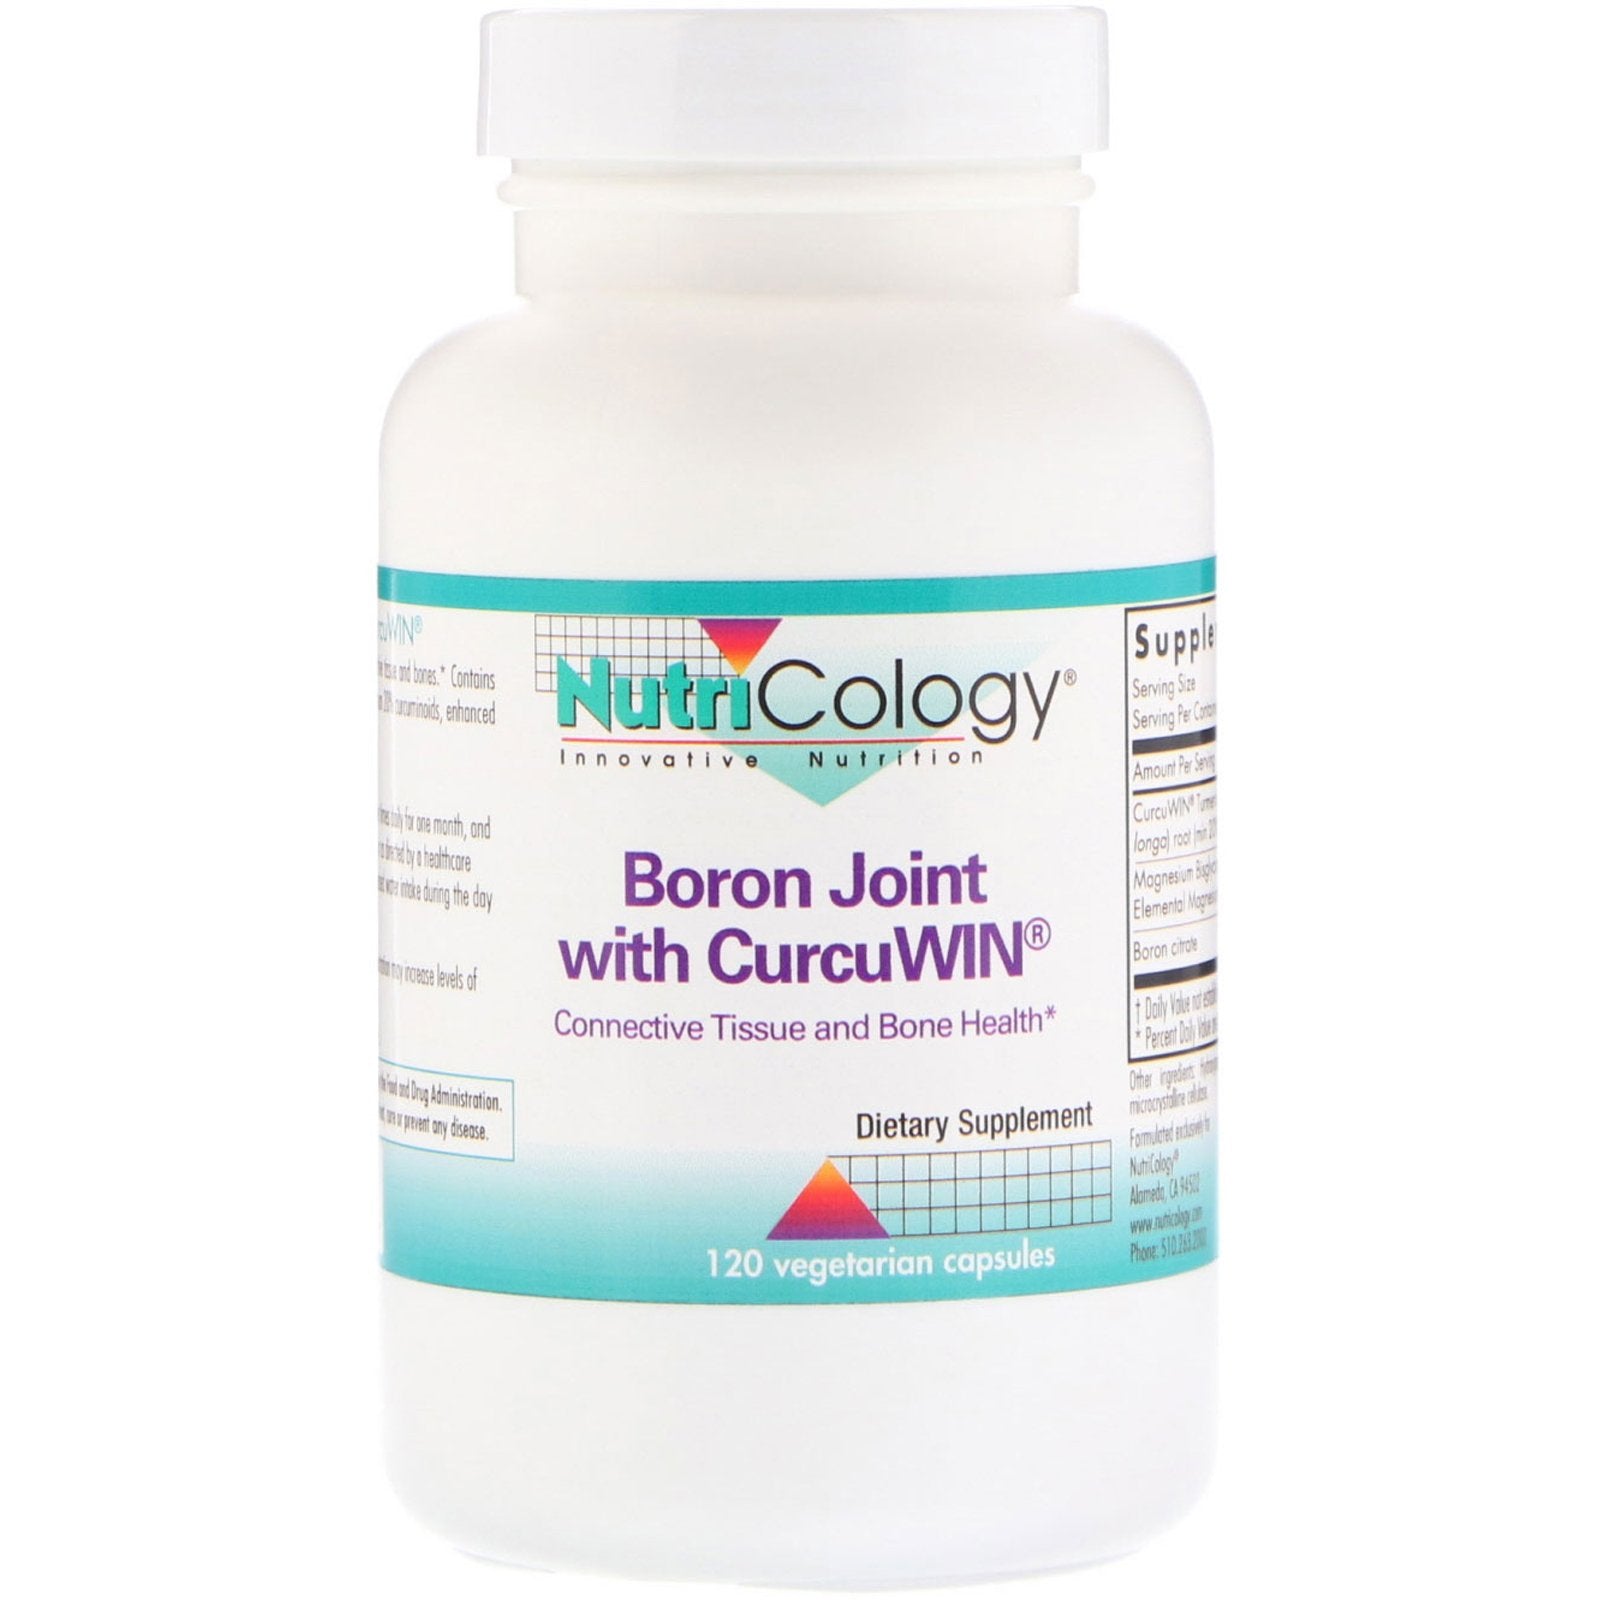 Nutricology, Boron Joint with CurcuWin, 120 Vegetarian Capsules